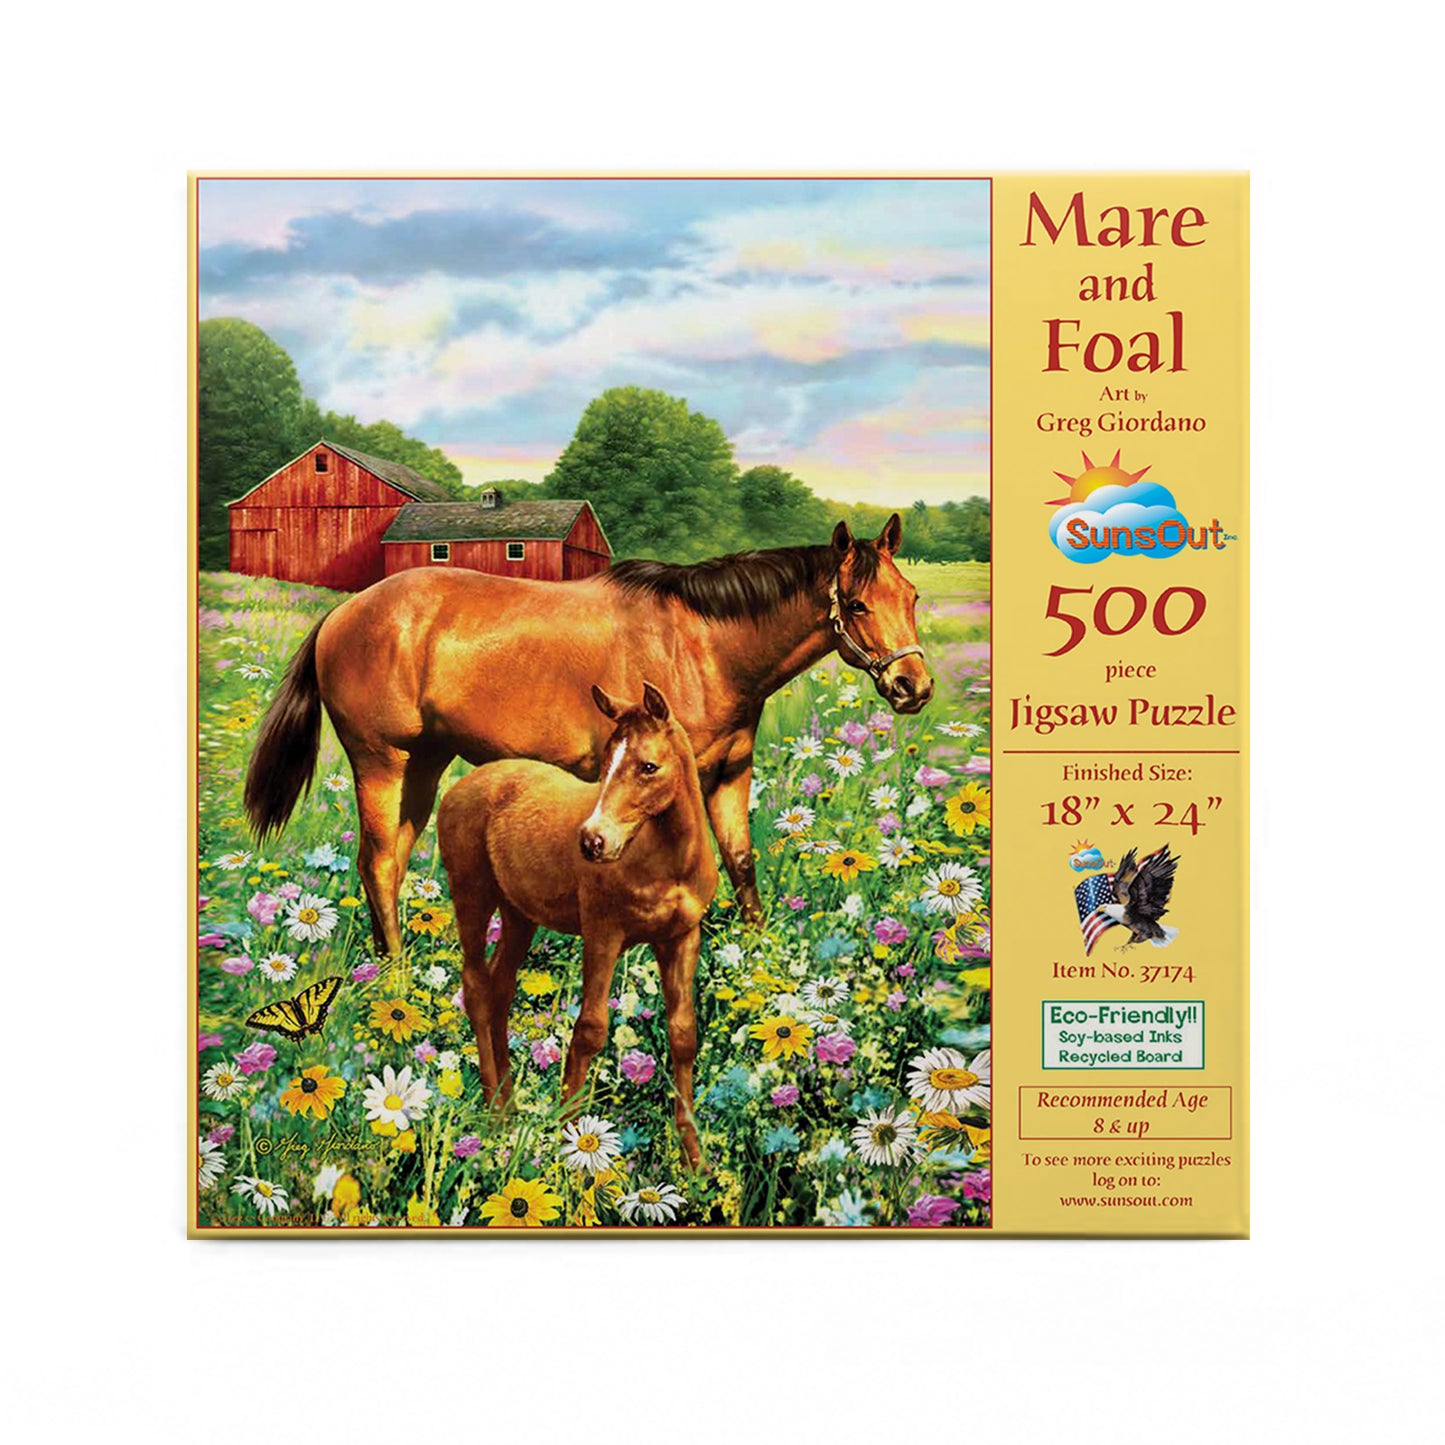 Mare and Foal - 500 Piece Jigsaw Puzzle